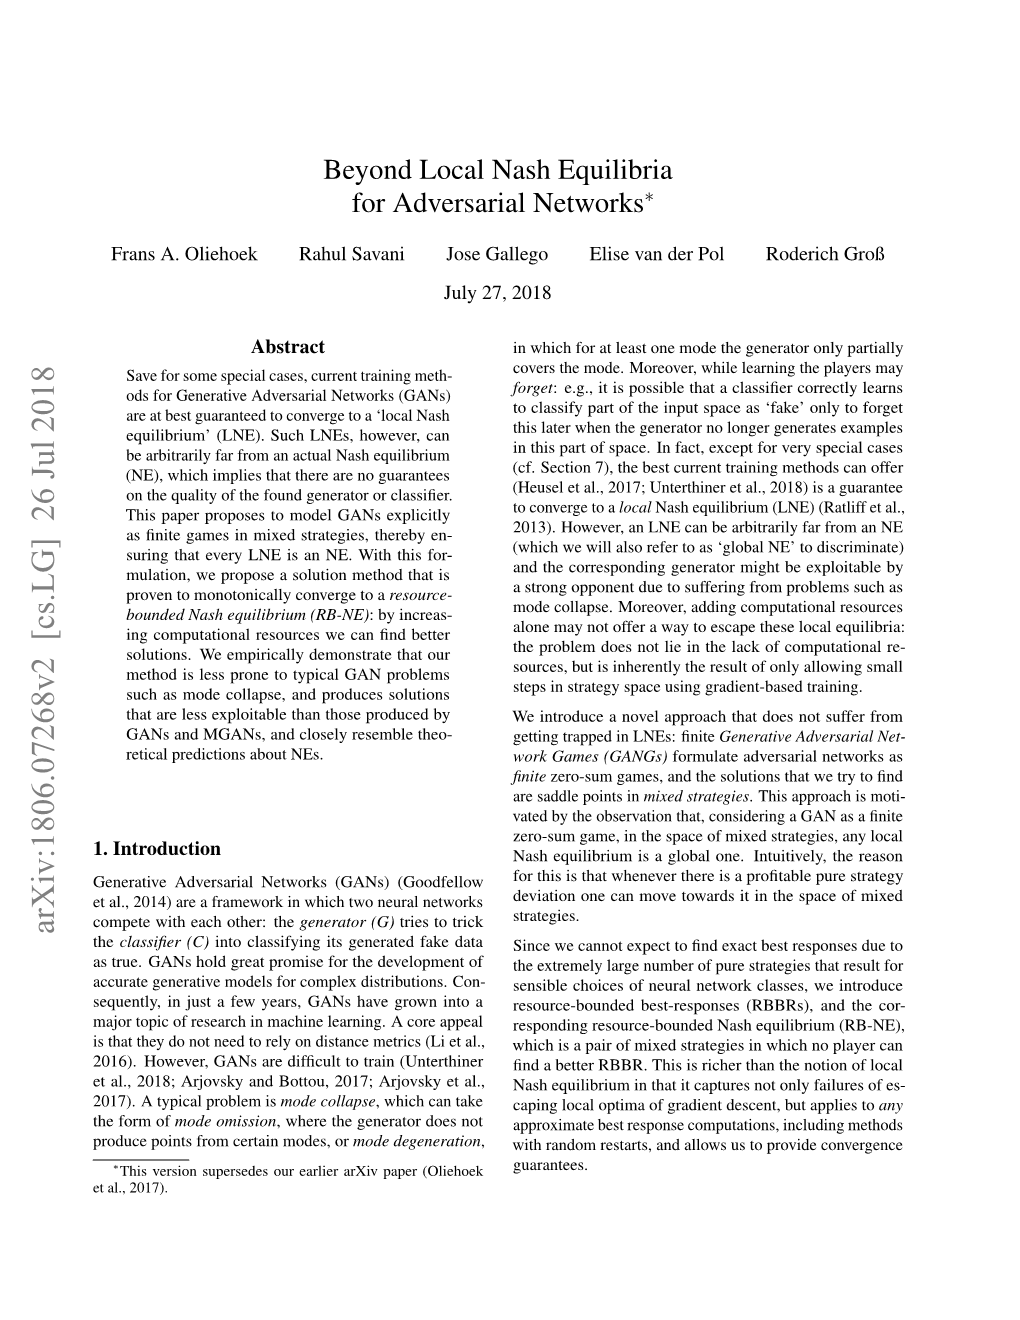 Beyond Local Nash Equilibria for Adversarial Networks∗